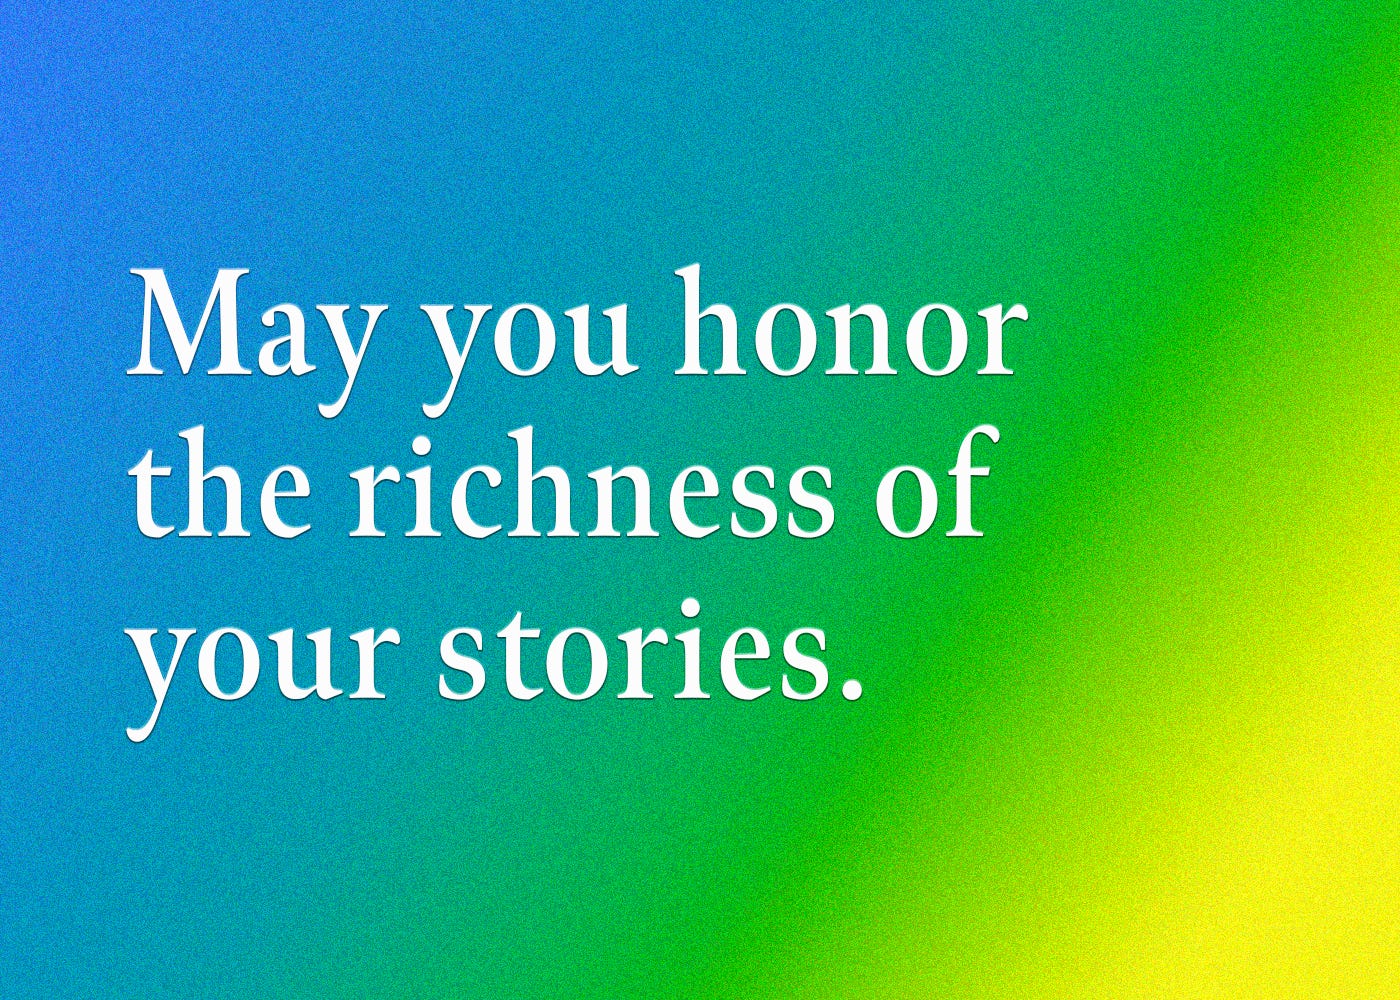 May you honor the richness of your stories